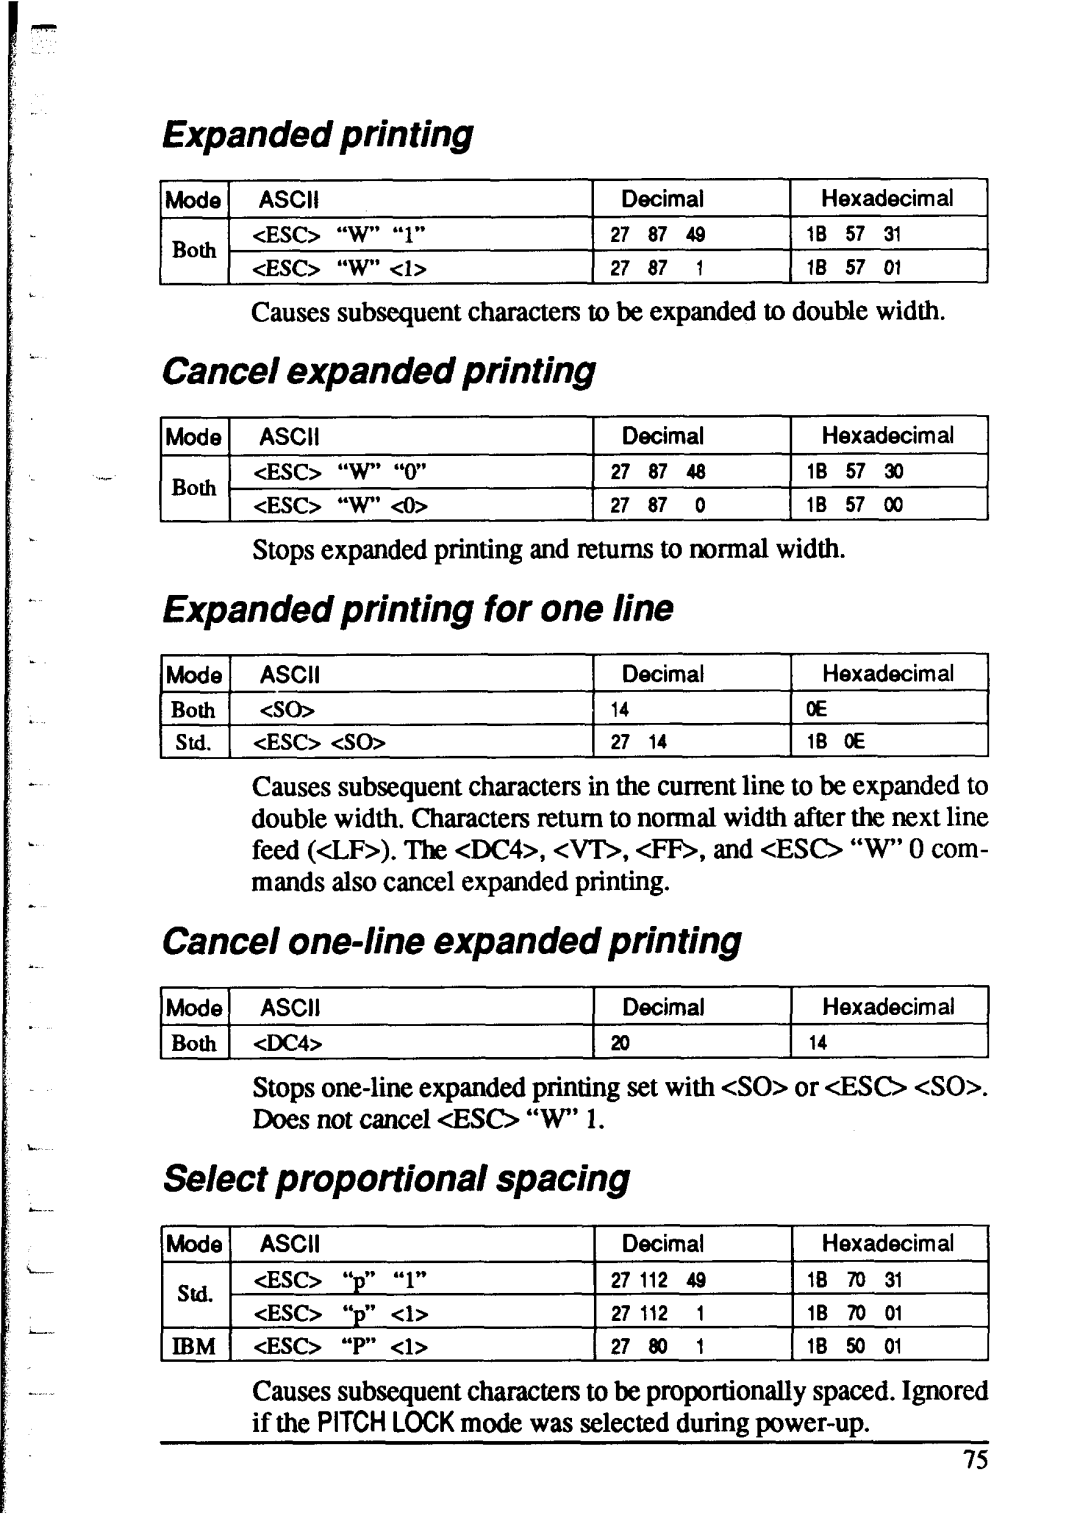 Star Micronics XR-1520 Cancel expanded printing, Expanded printing for one line, Cancel one-line expanded printing 